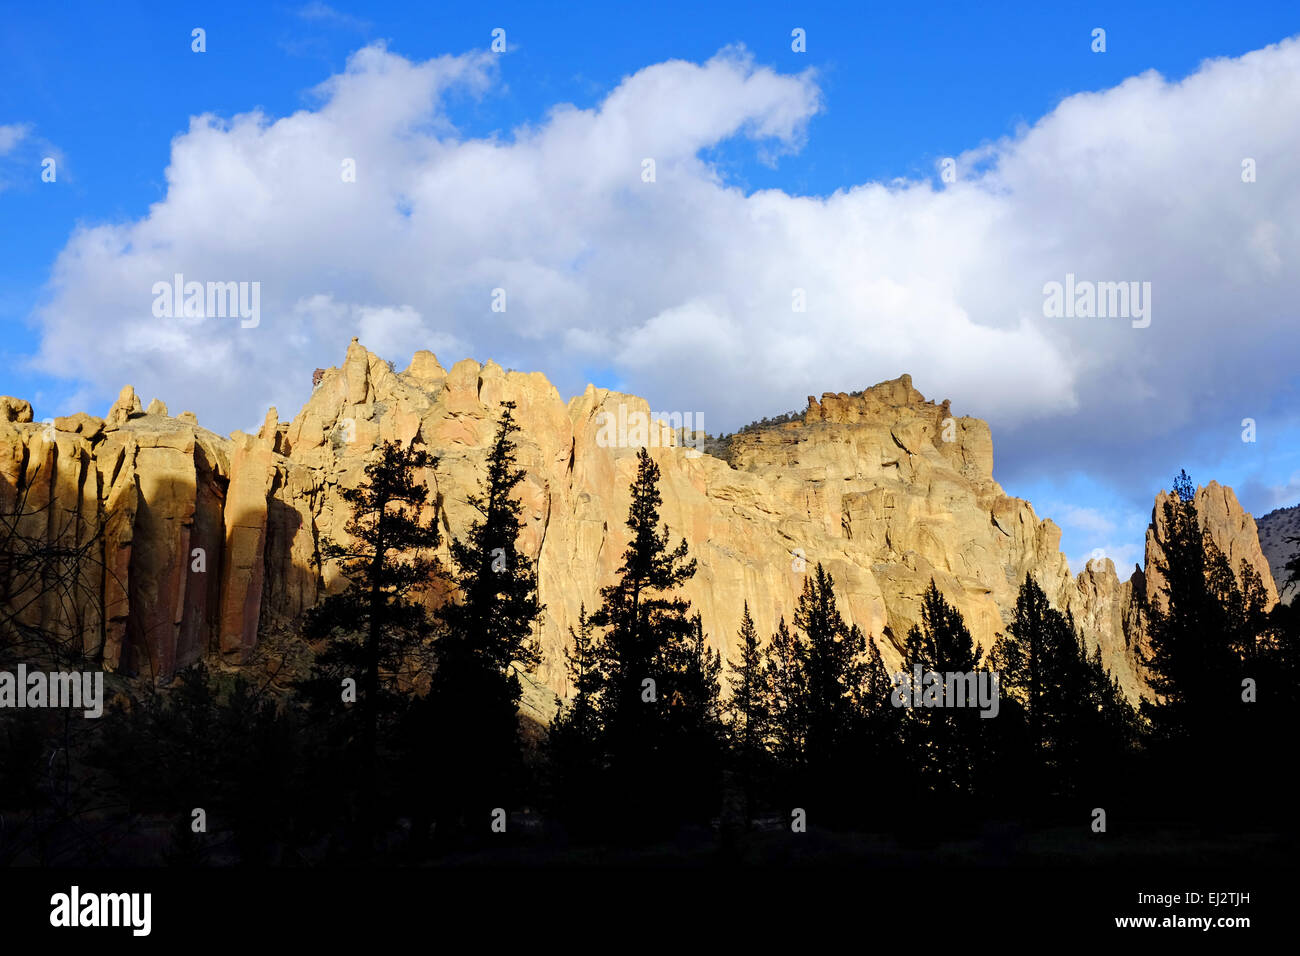 Smith Rock State Park on the Crooded River near Terrebonne, Oregon Stock Photo